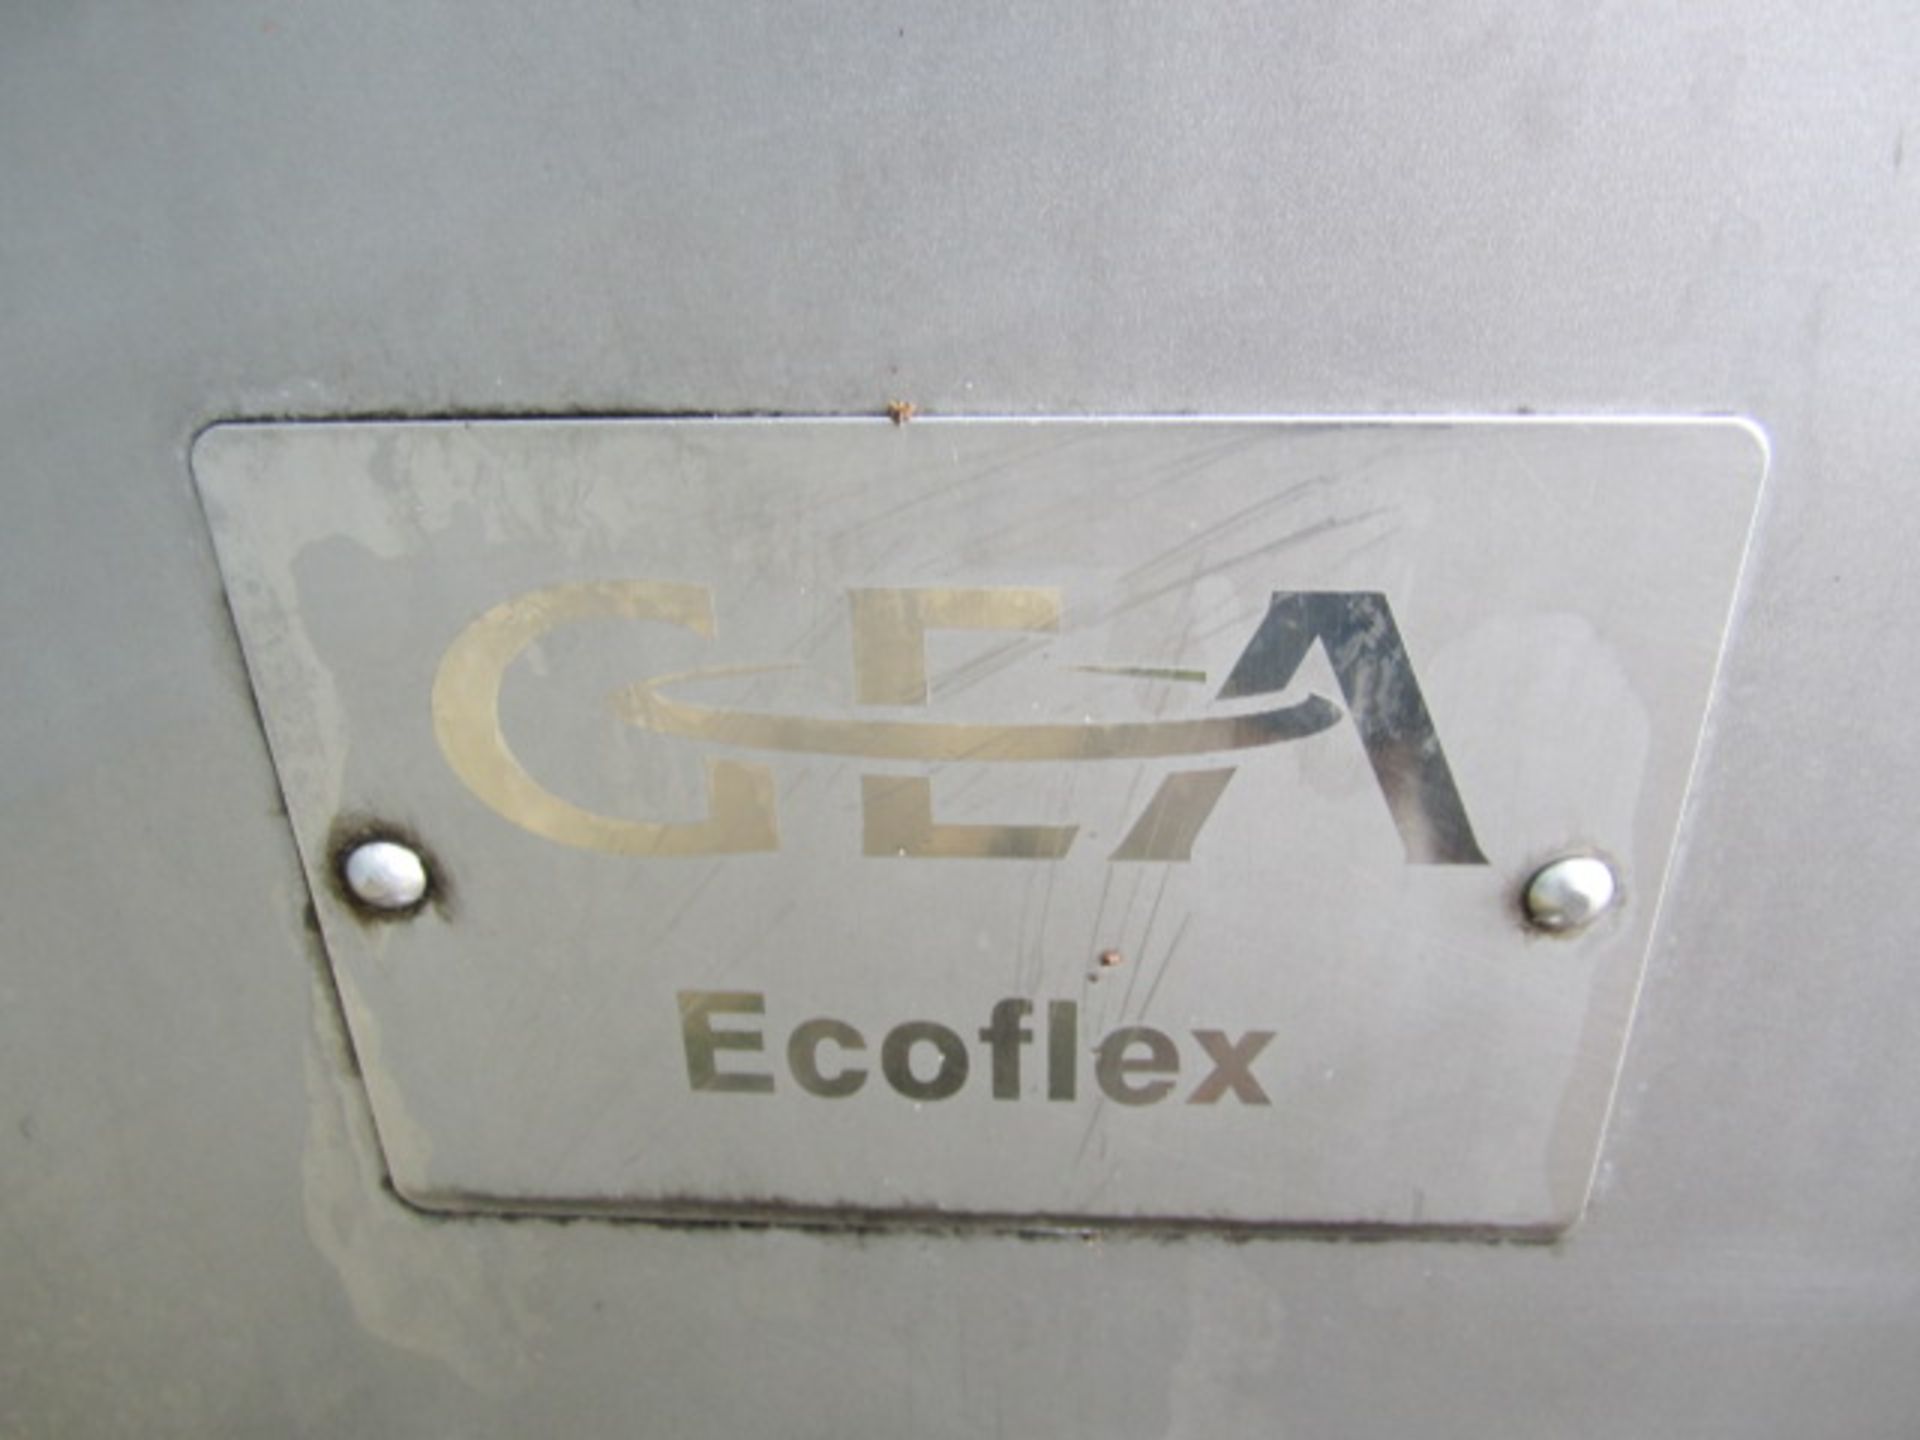 GEA Ecoflex Stainless Steel Plate/Frame Exchanger - Image 5 of 5